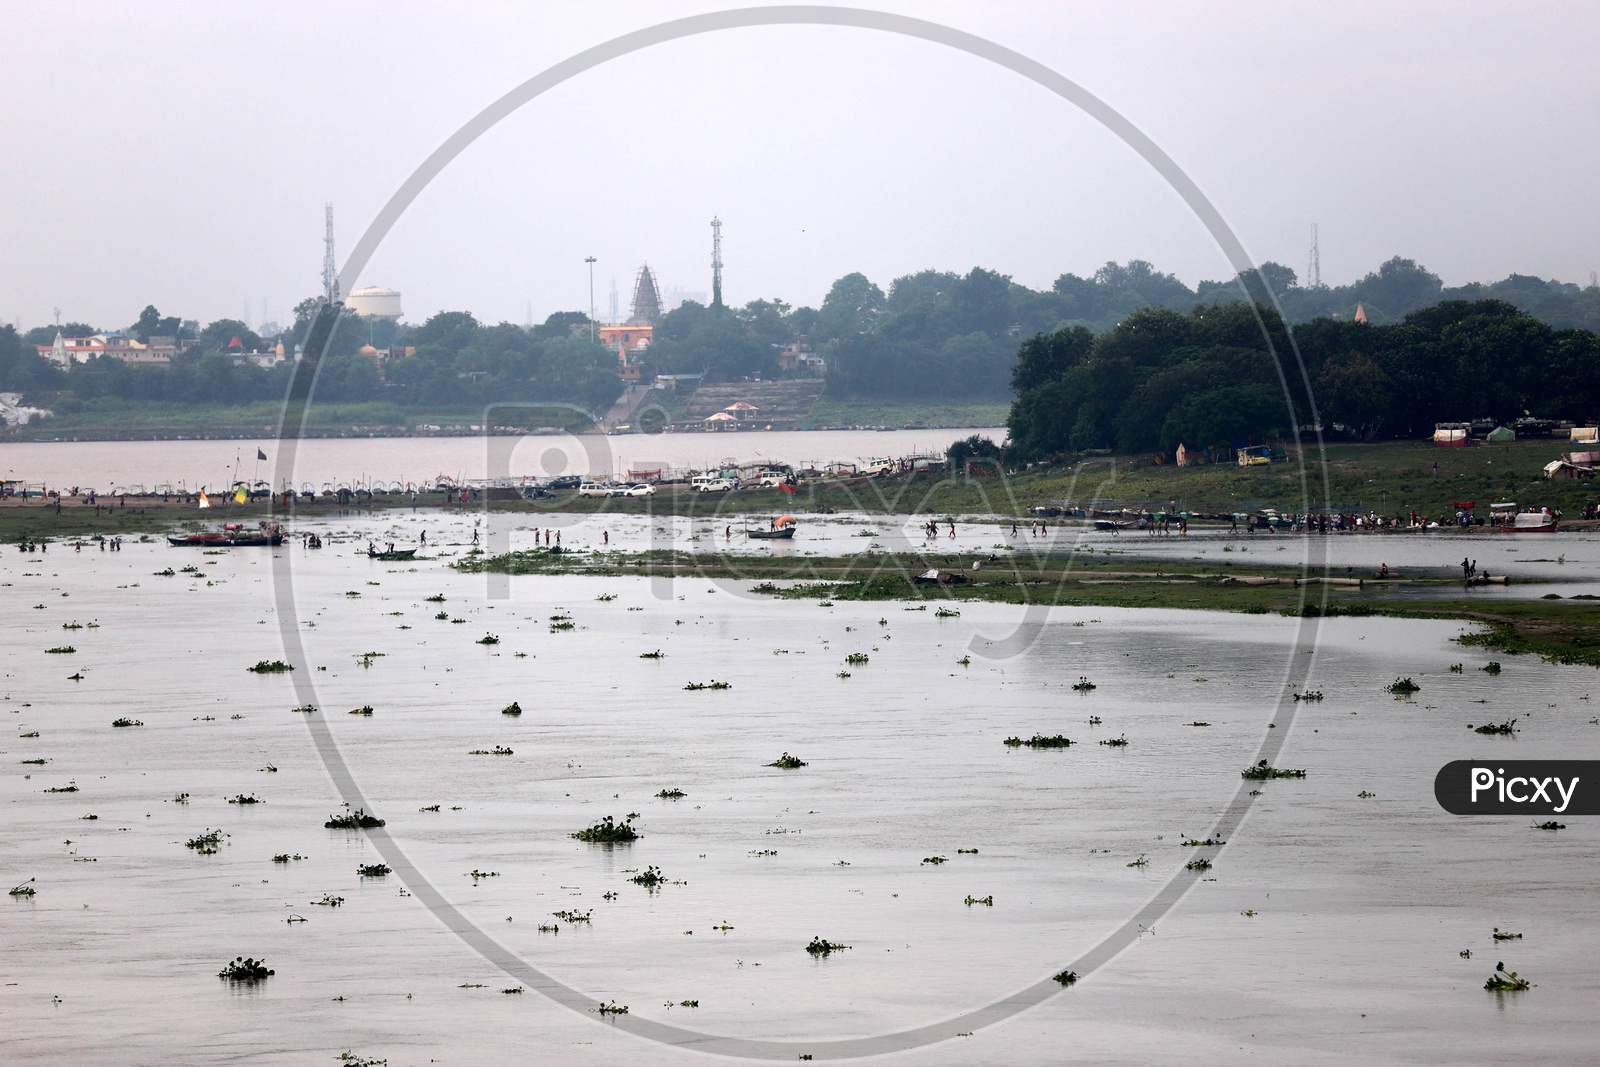 A View Of Ghats Submerged In The Flooded Water Of River Ganga And Yamuna During Heavy Rain In Prayagraj, August 23, 20202.